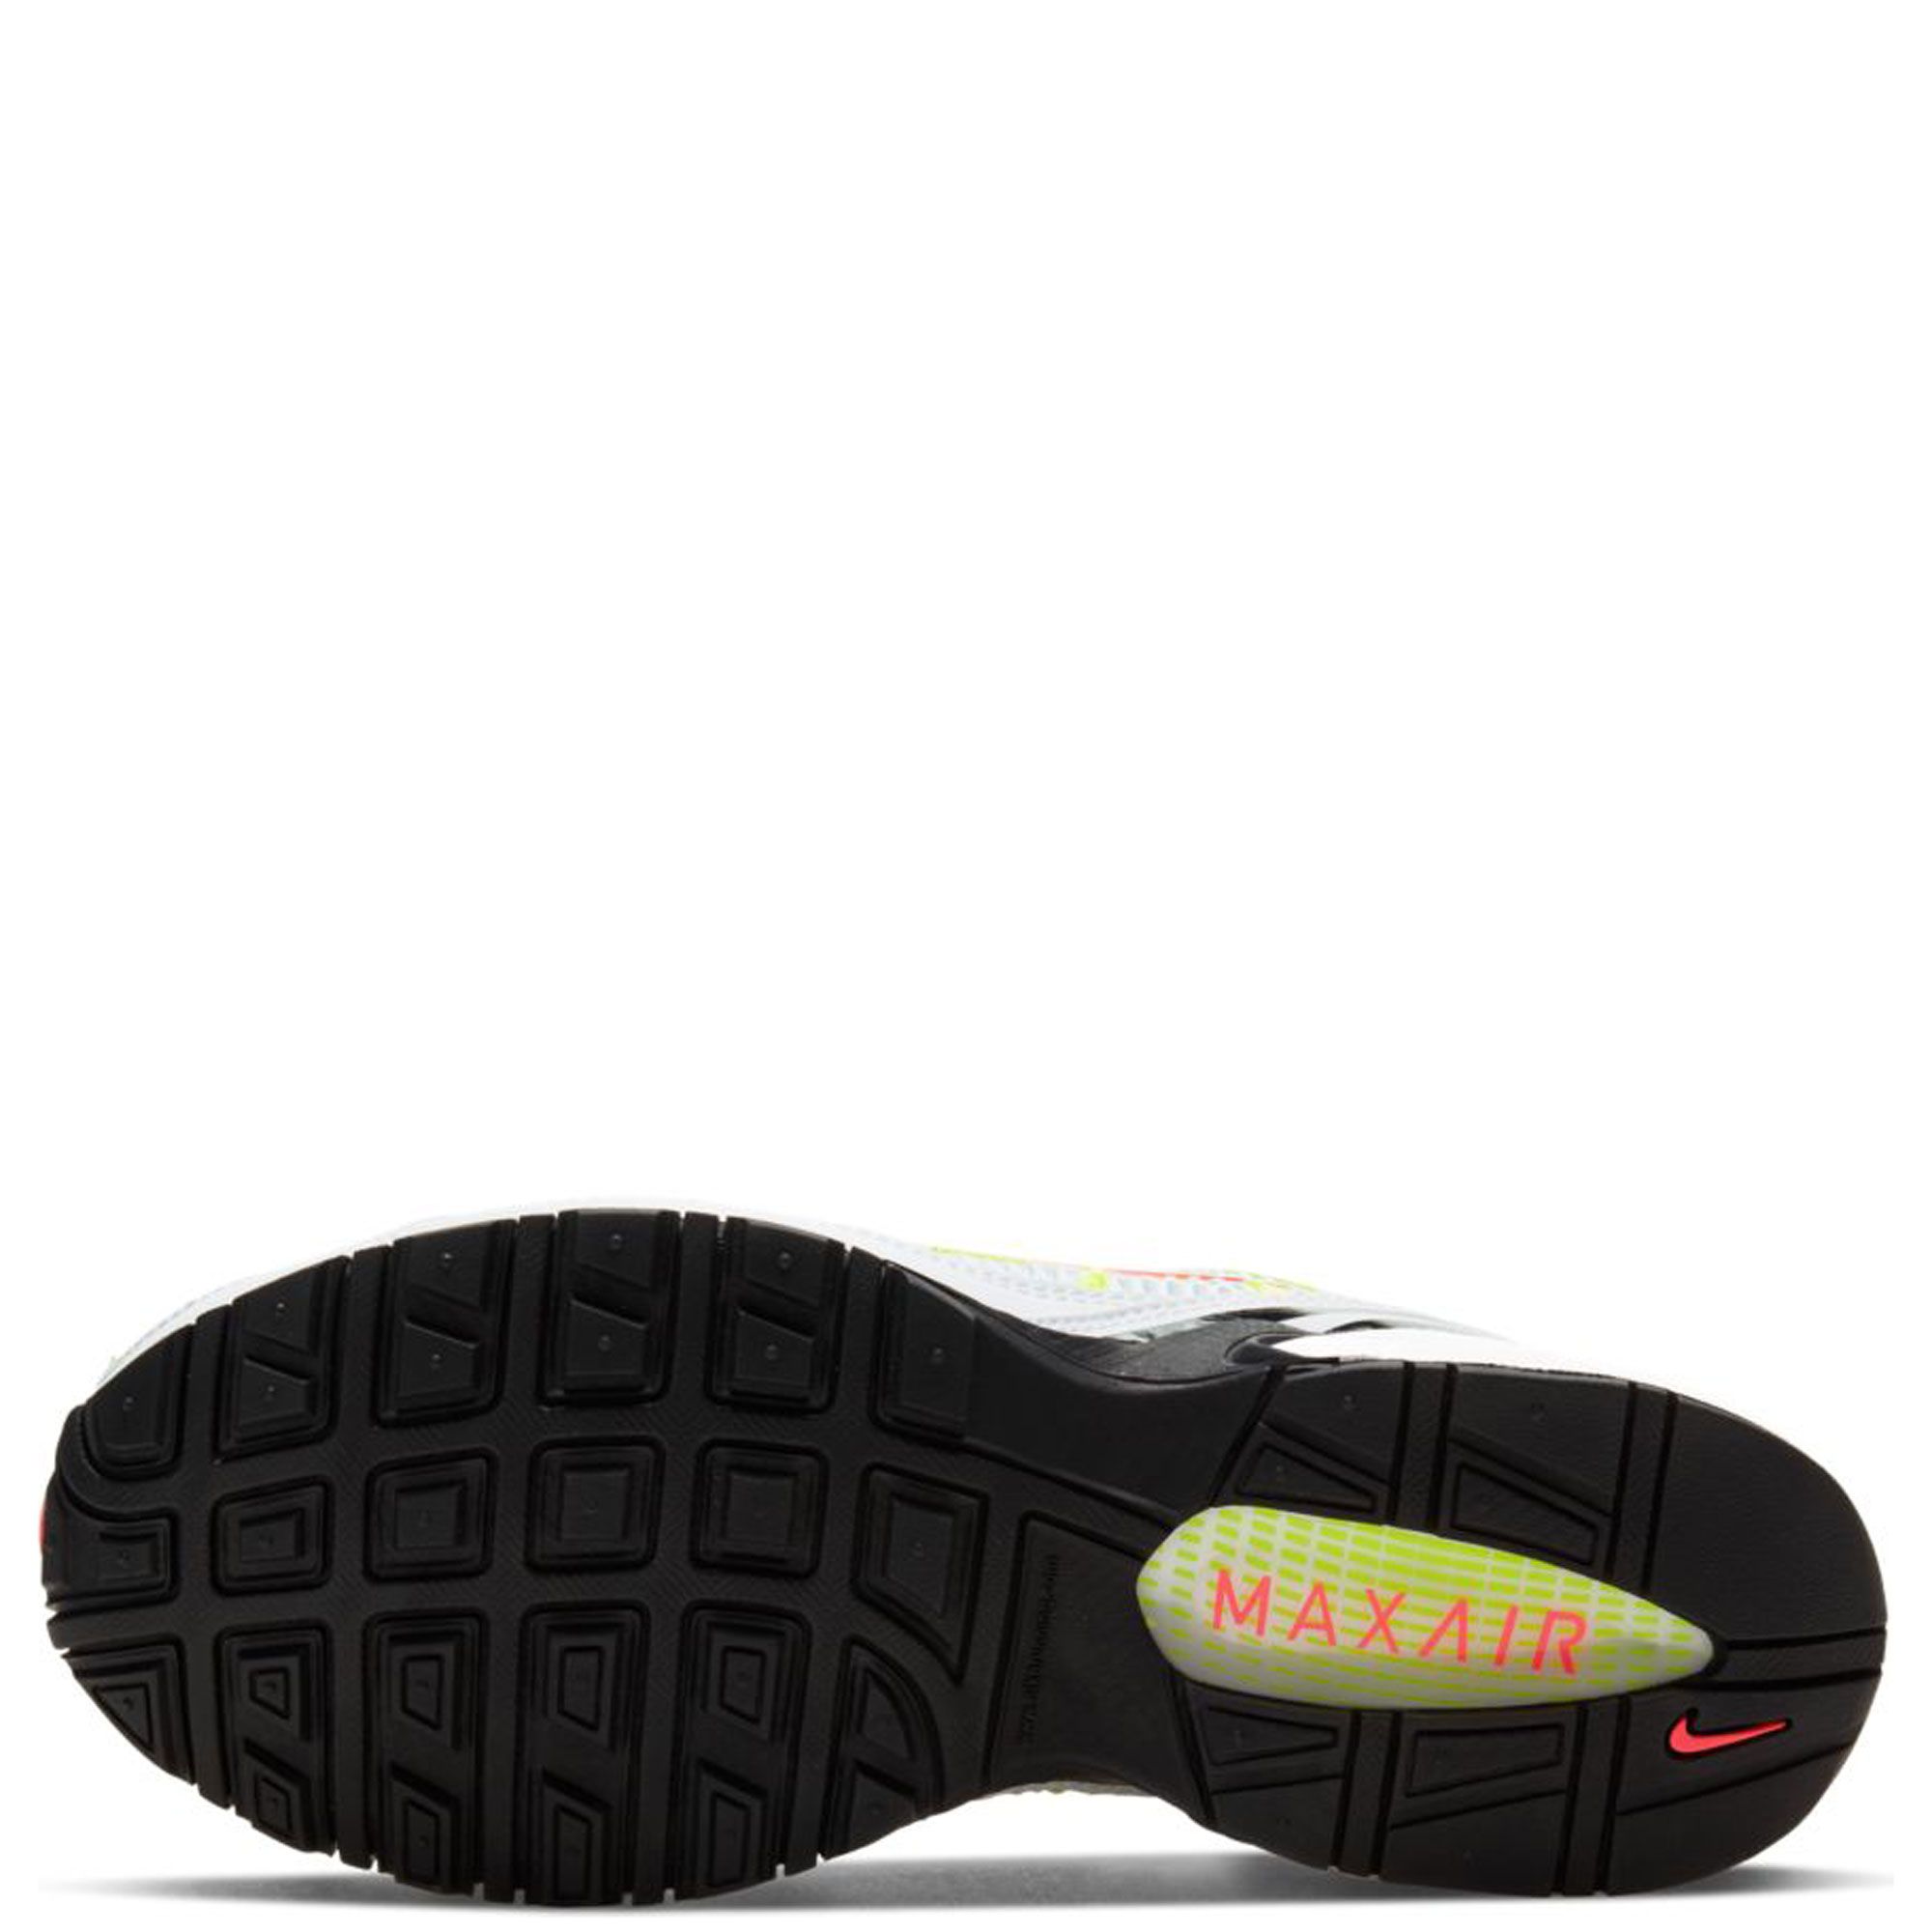  Nike Womens Air Max Torch 4 Running Shoe (6,  White/Black-Volt-Laser Crimson) : Nike: Clothing, Shoes & Jewelry